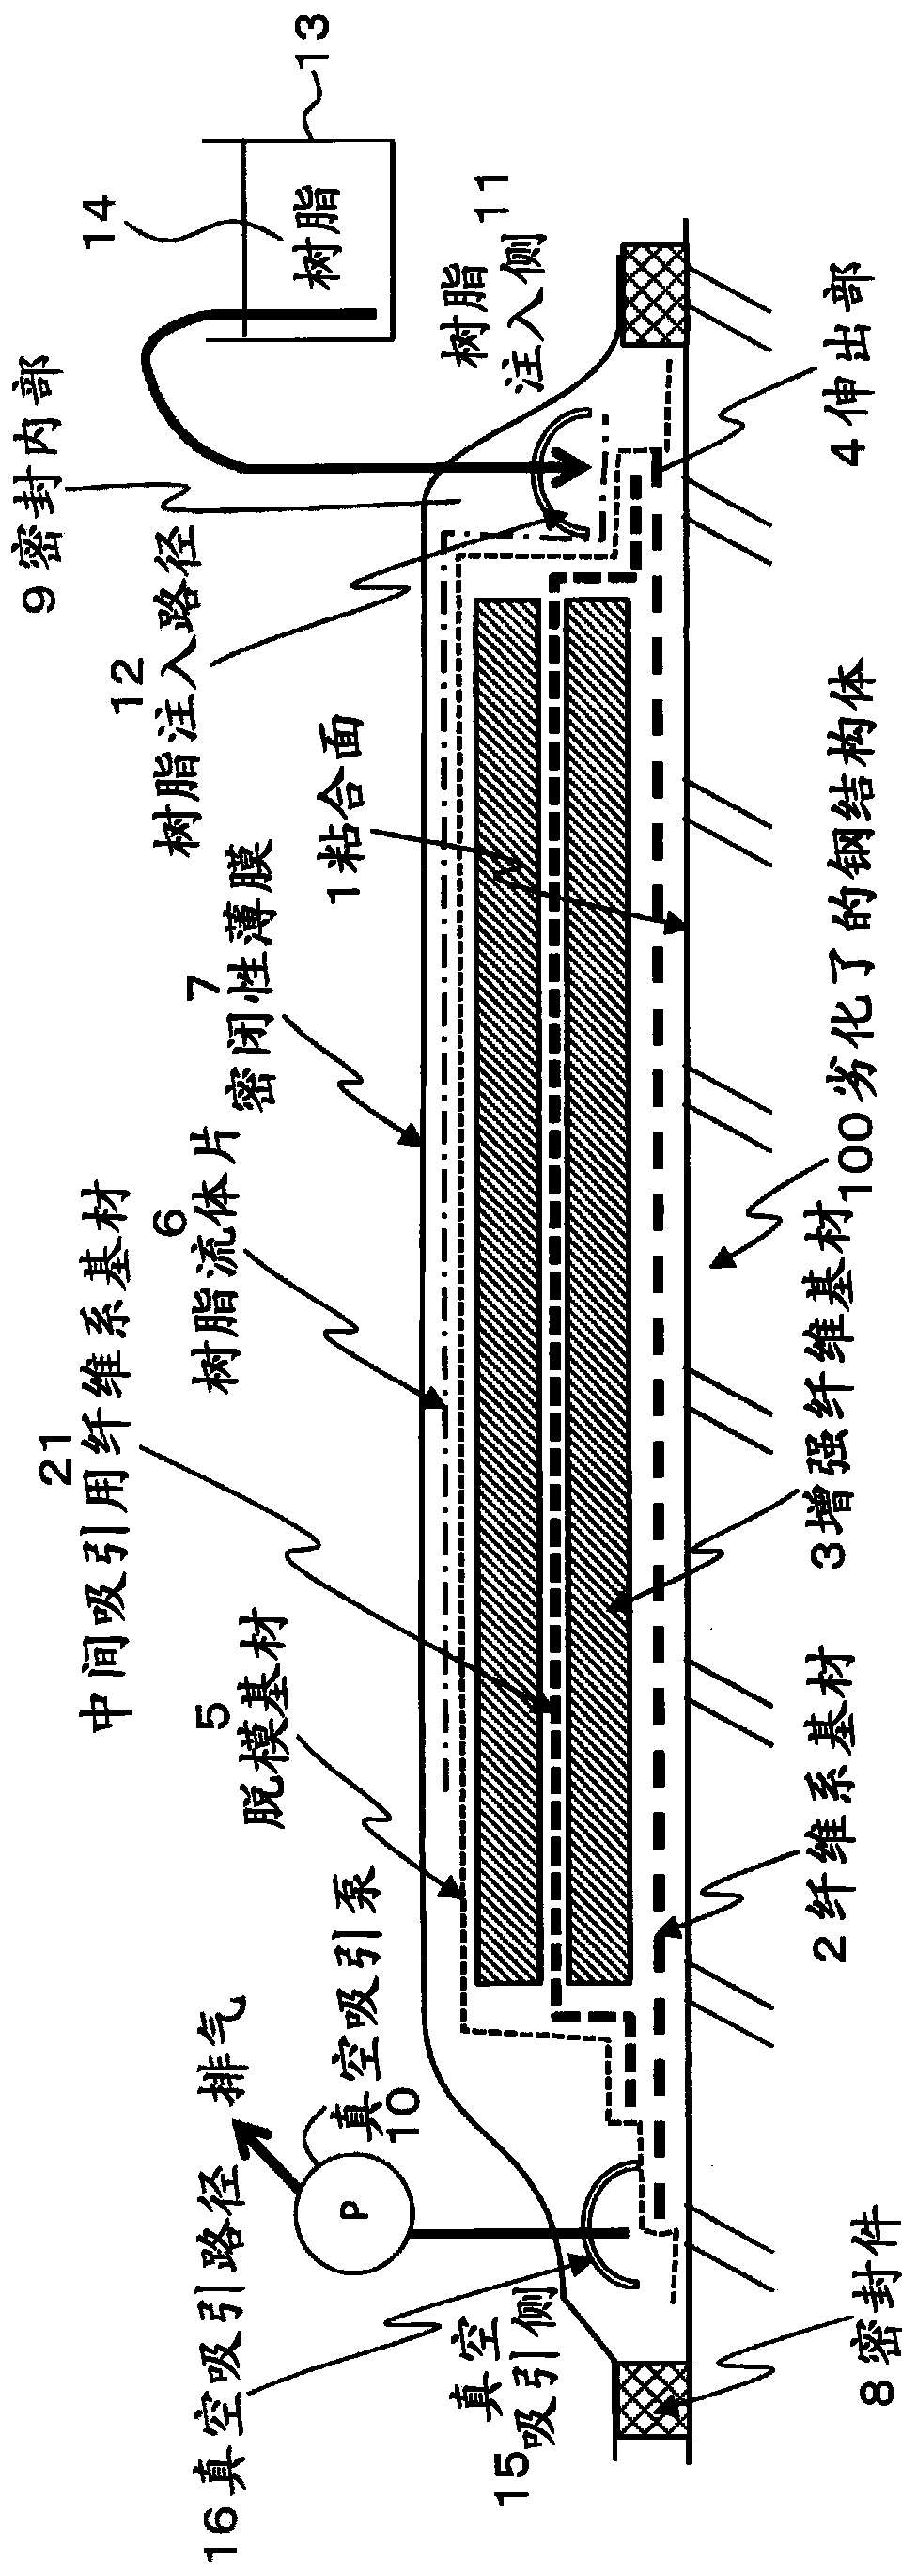 Structure-frp material bond construction and bonding method